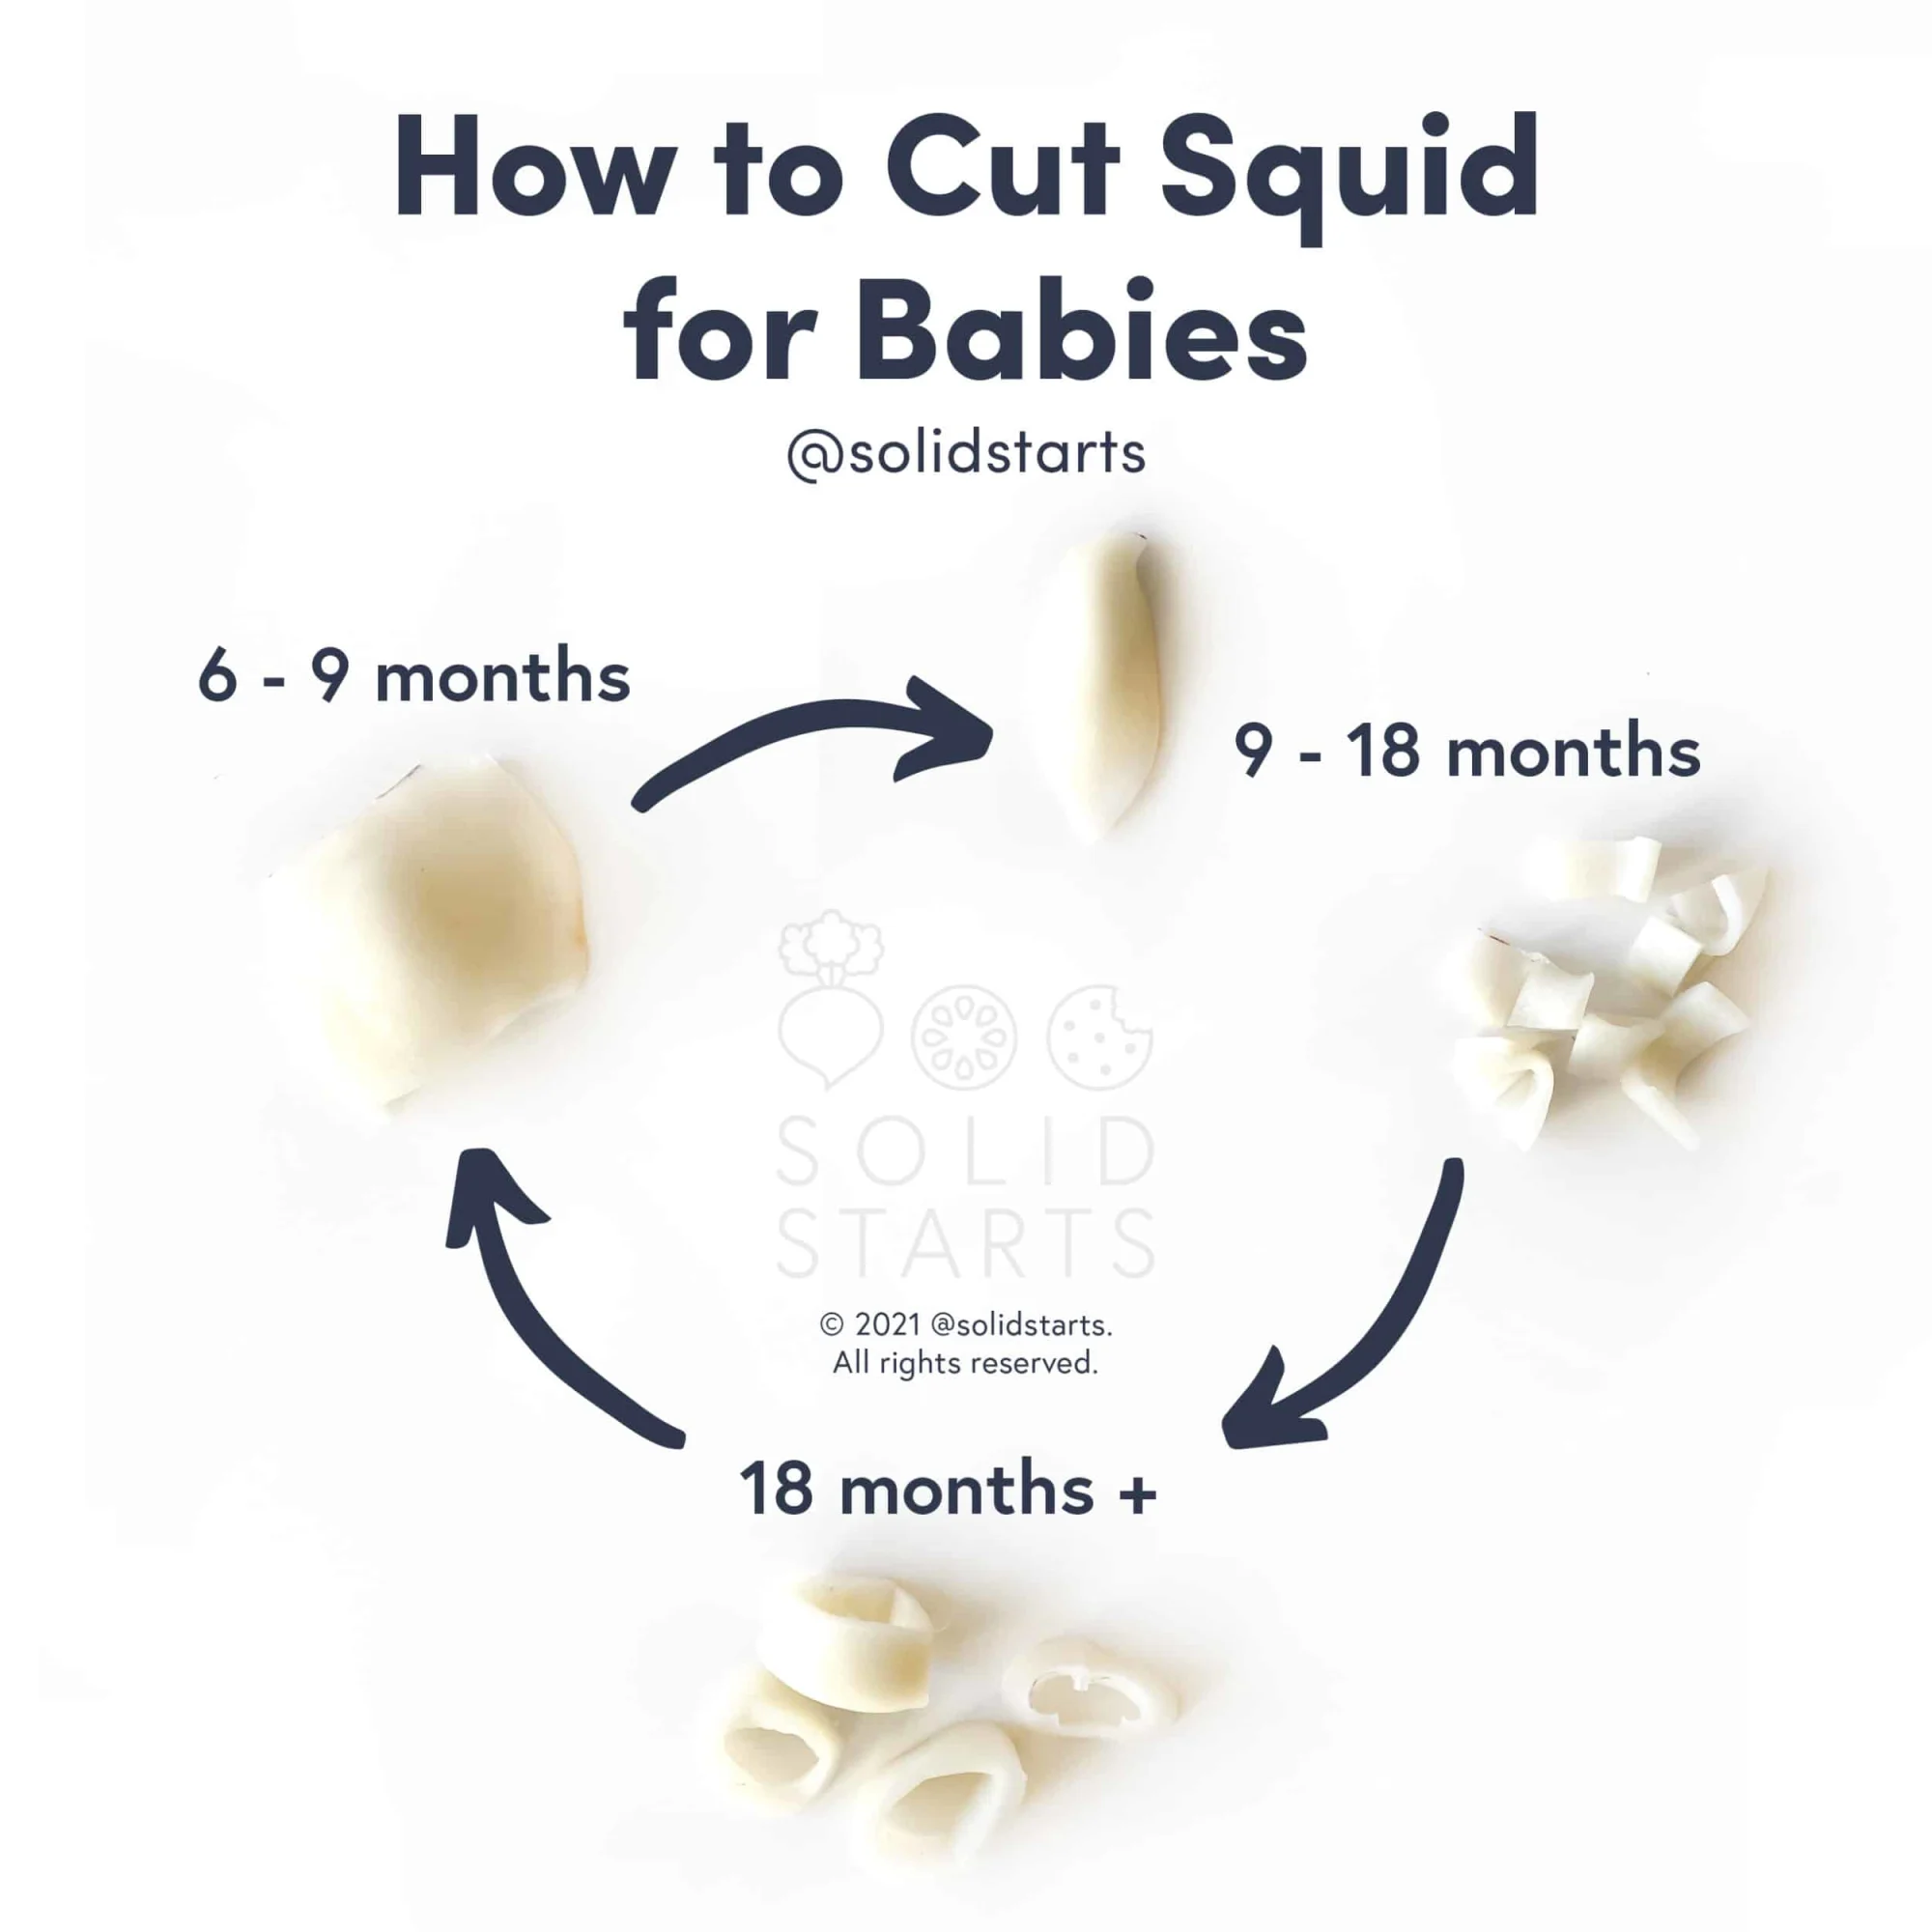 infographic showing how to cut squid for babies by age. Large section of squid mantle for 6-9 months. Bite-sized pieces of cooked squid mantle as well as large section of squid mantle for 9-18 months. Calamari rings for 18 months and up.